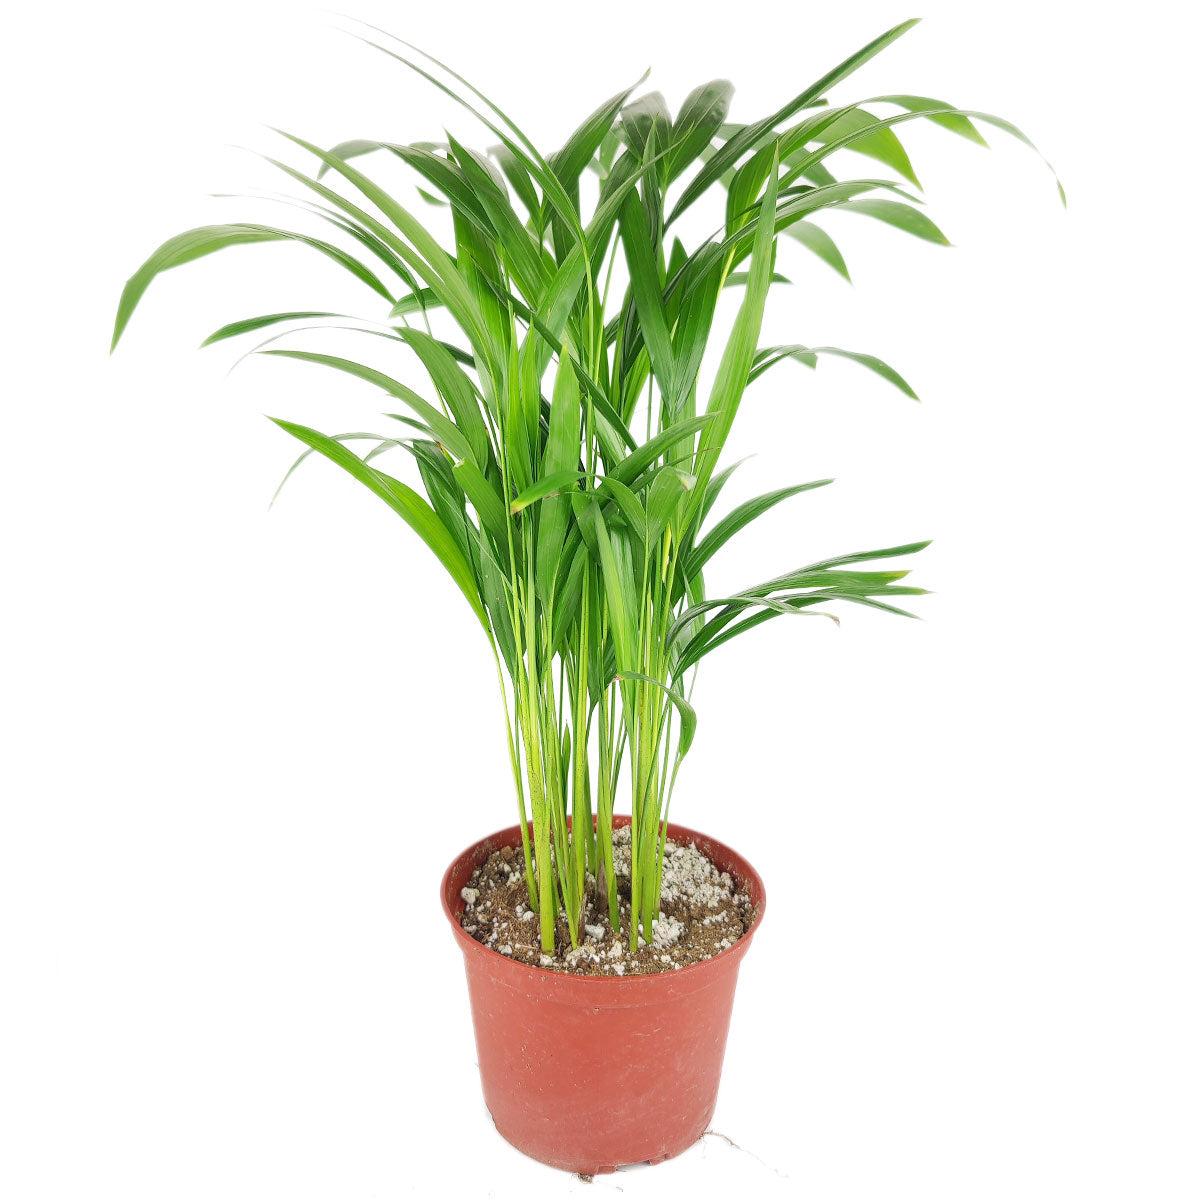 Areca palm, plants for air purification and toxic elimination, how to detoxify your indoor air with plants, best low light houseplants